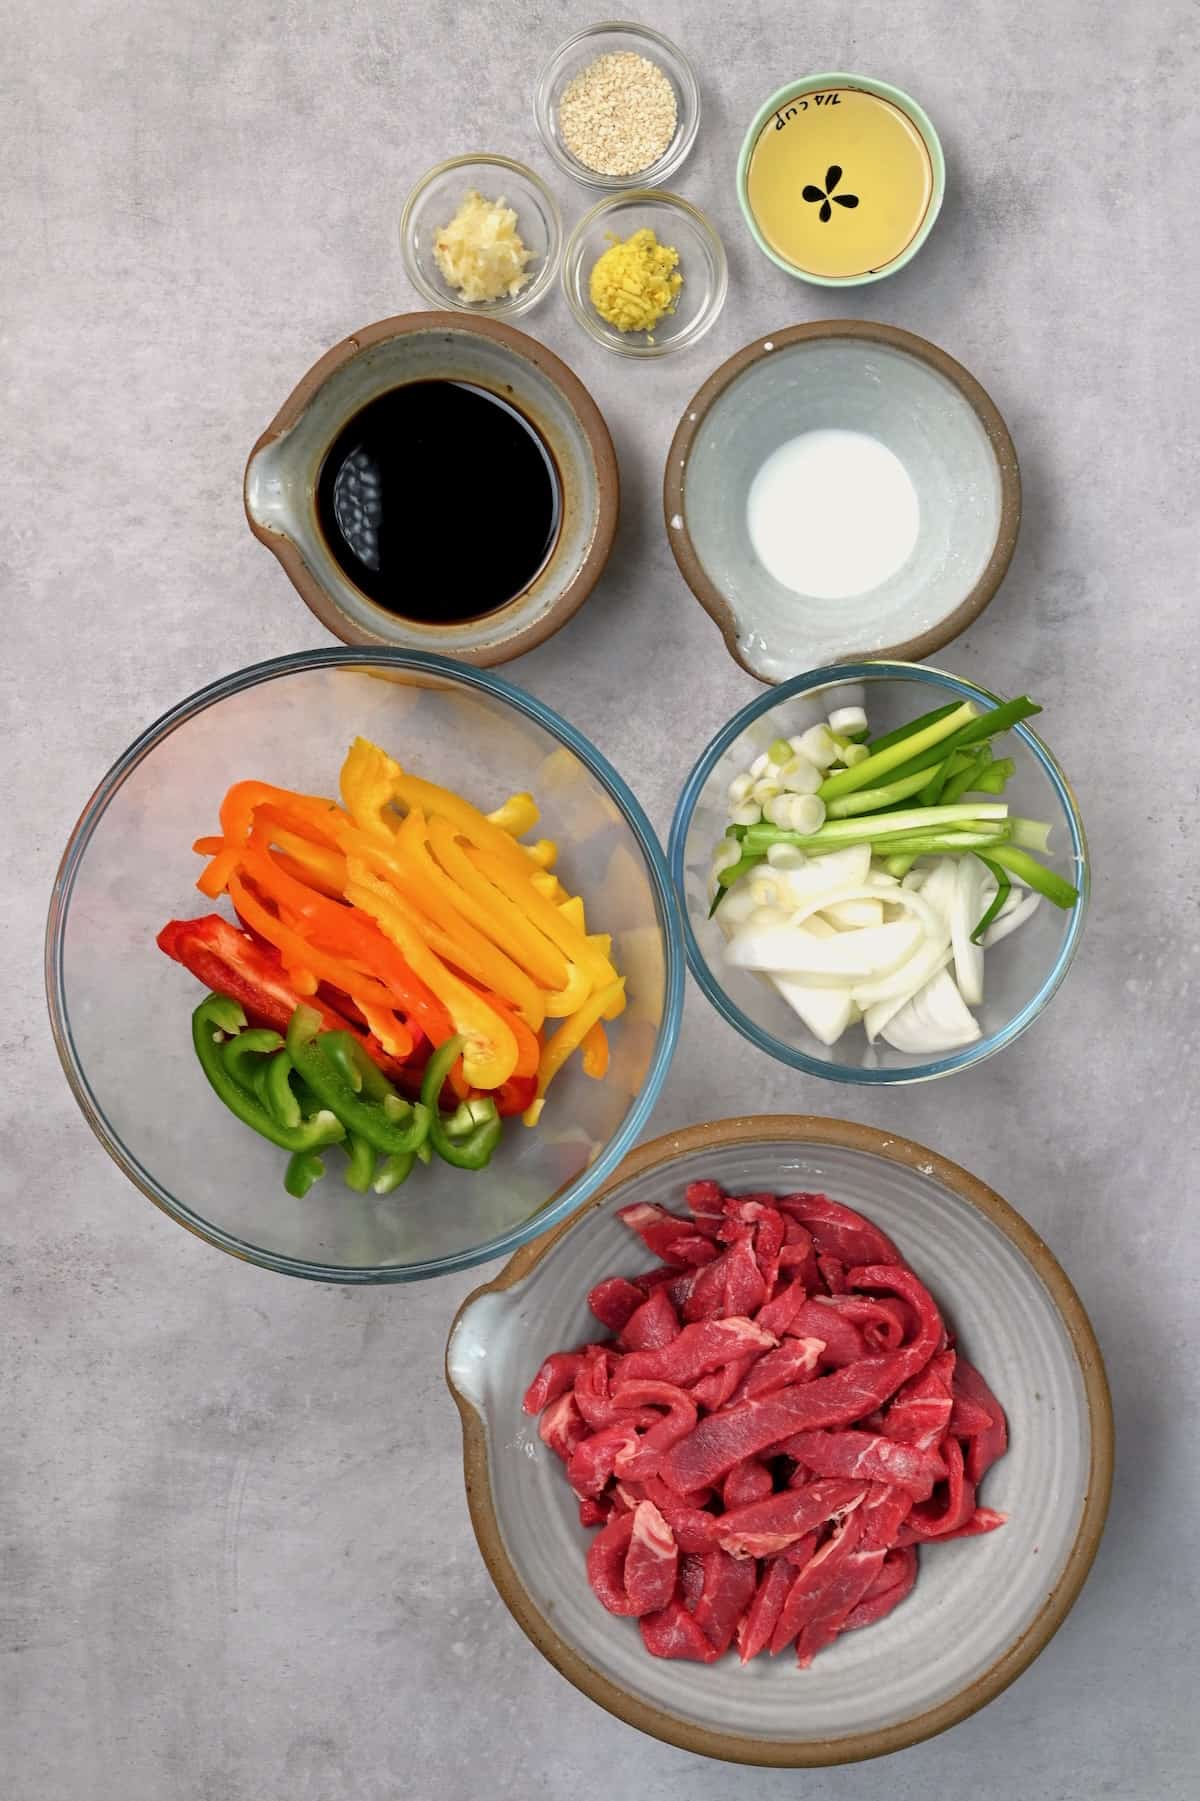 Chopped ingredients and prepared sauces for beef stir fry